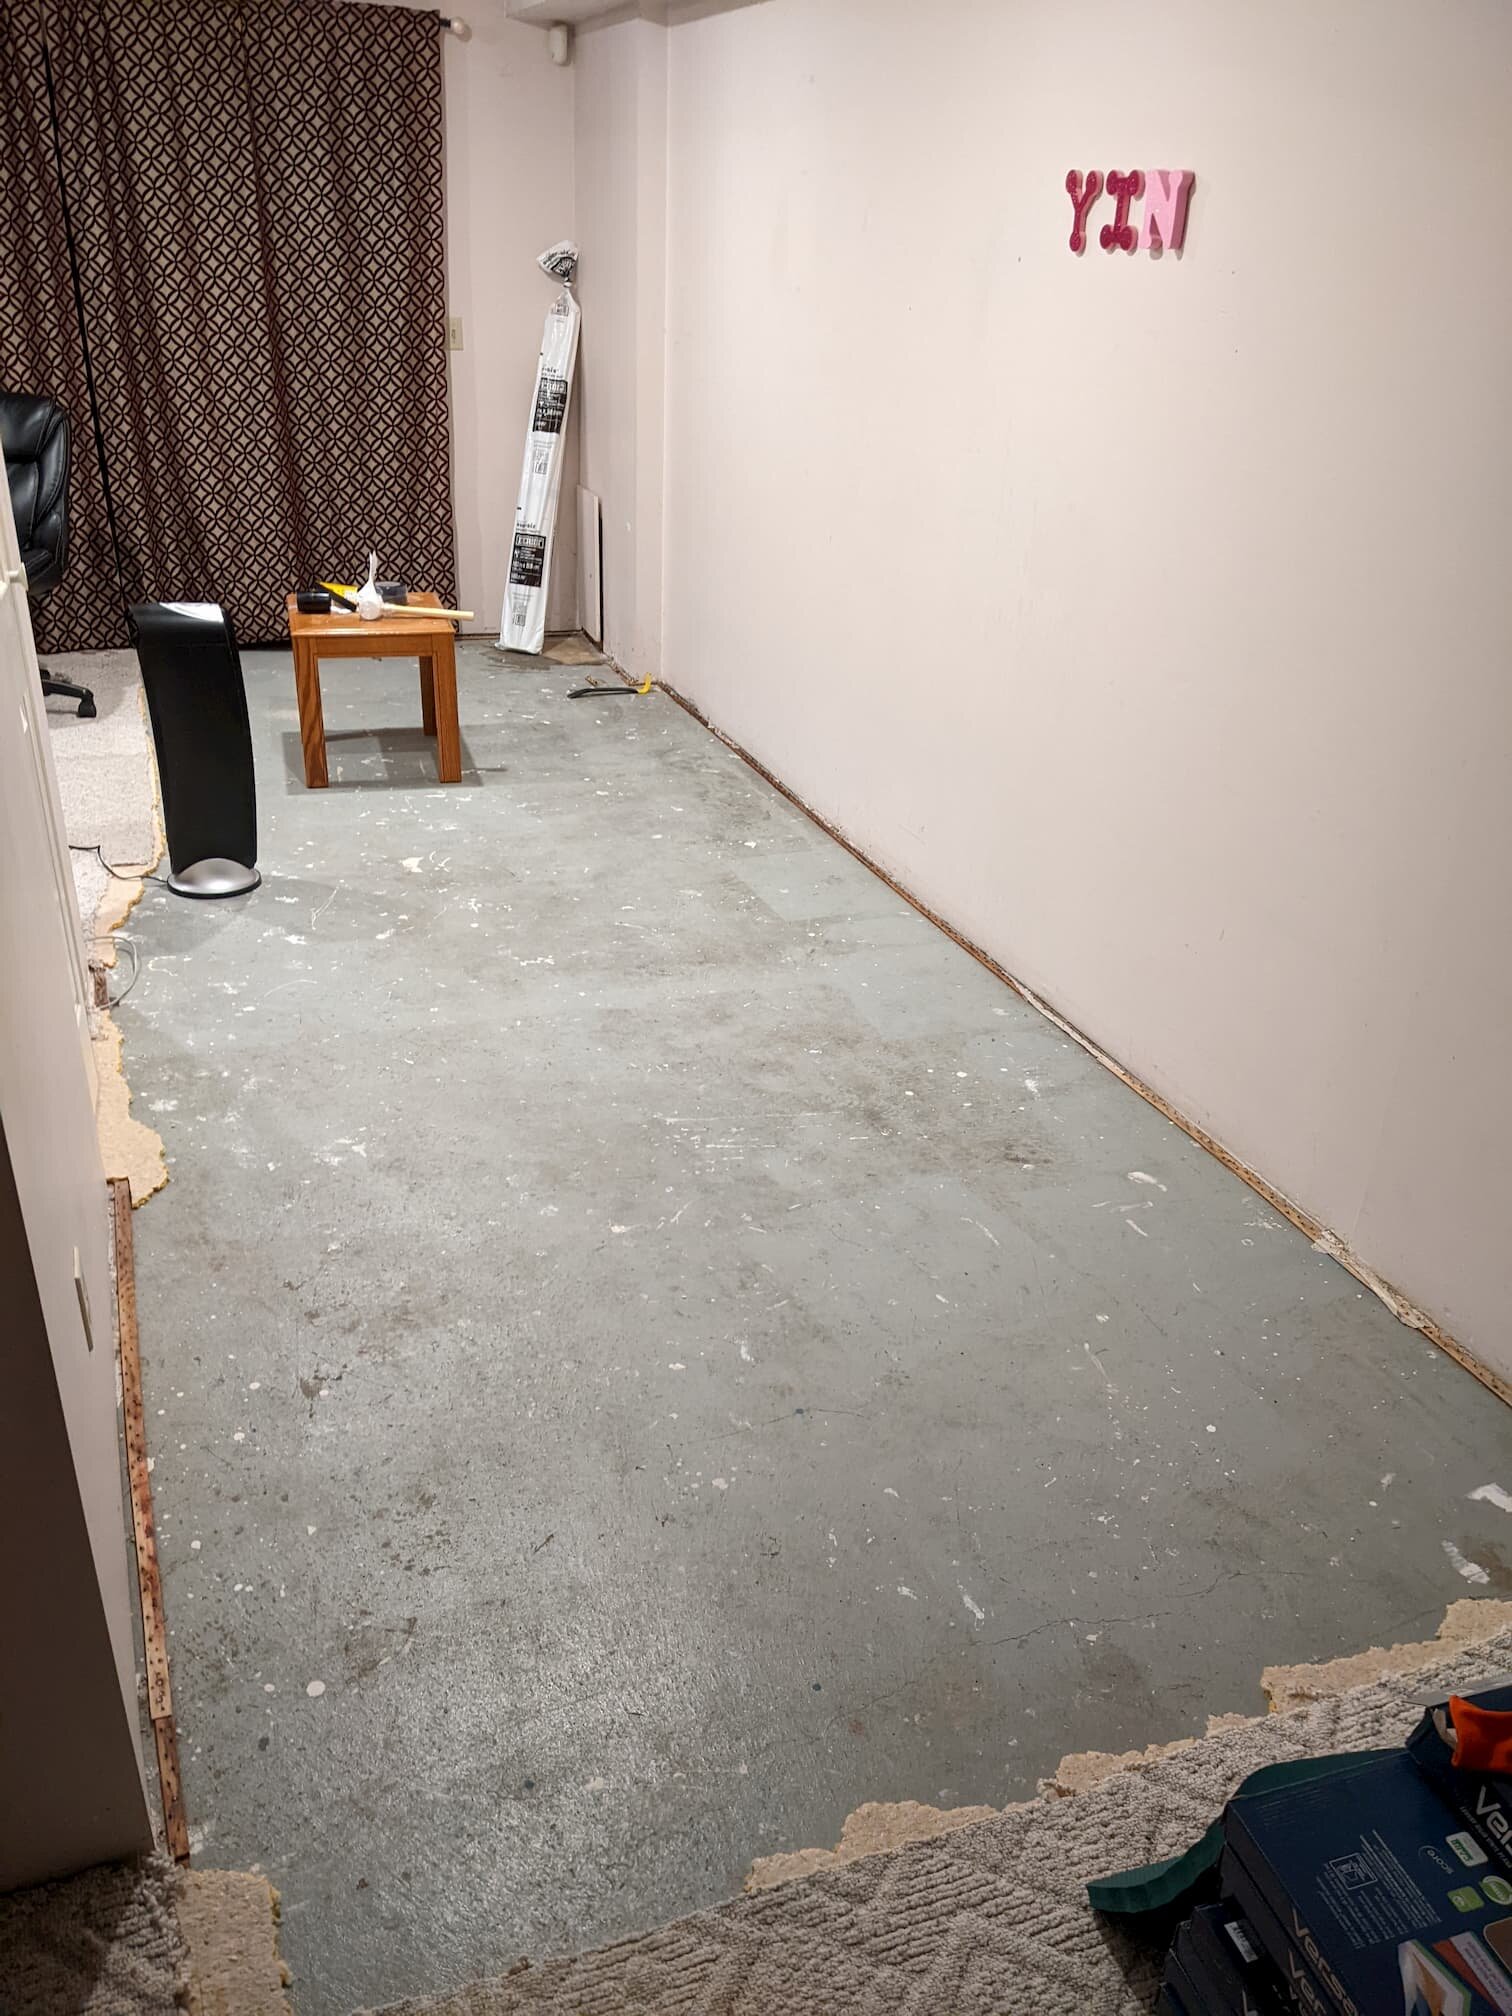 https://journal.yinfor.com/images/first-remove-rugs.jpg